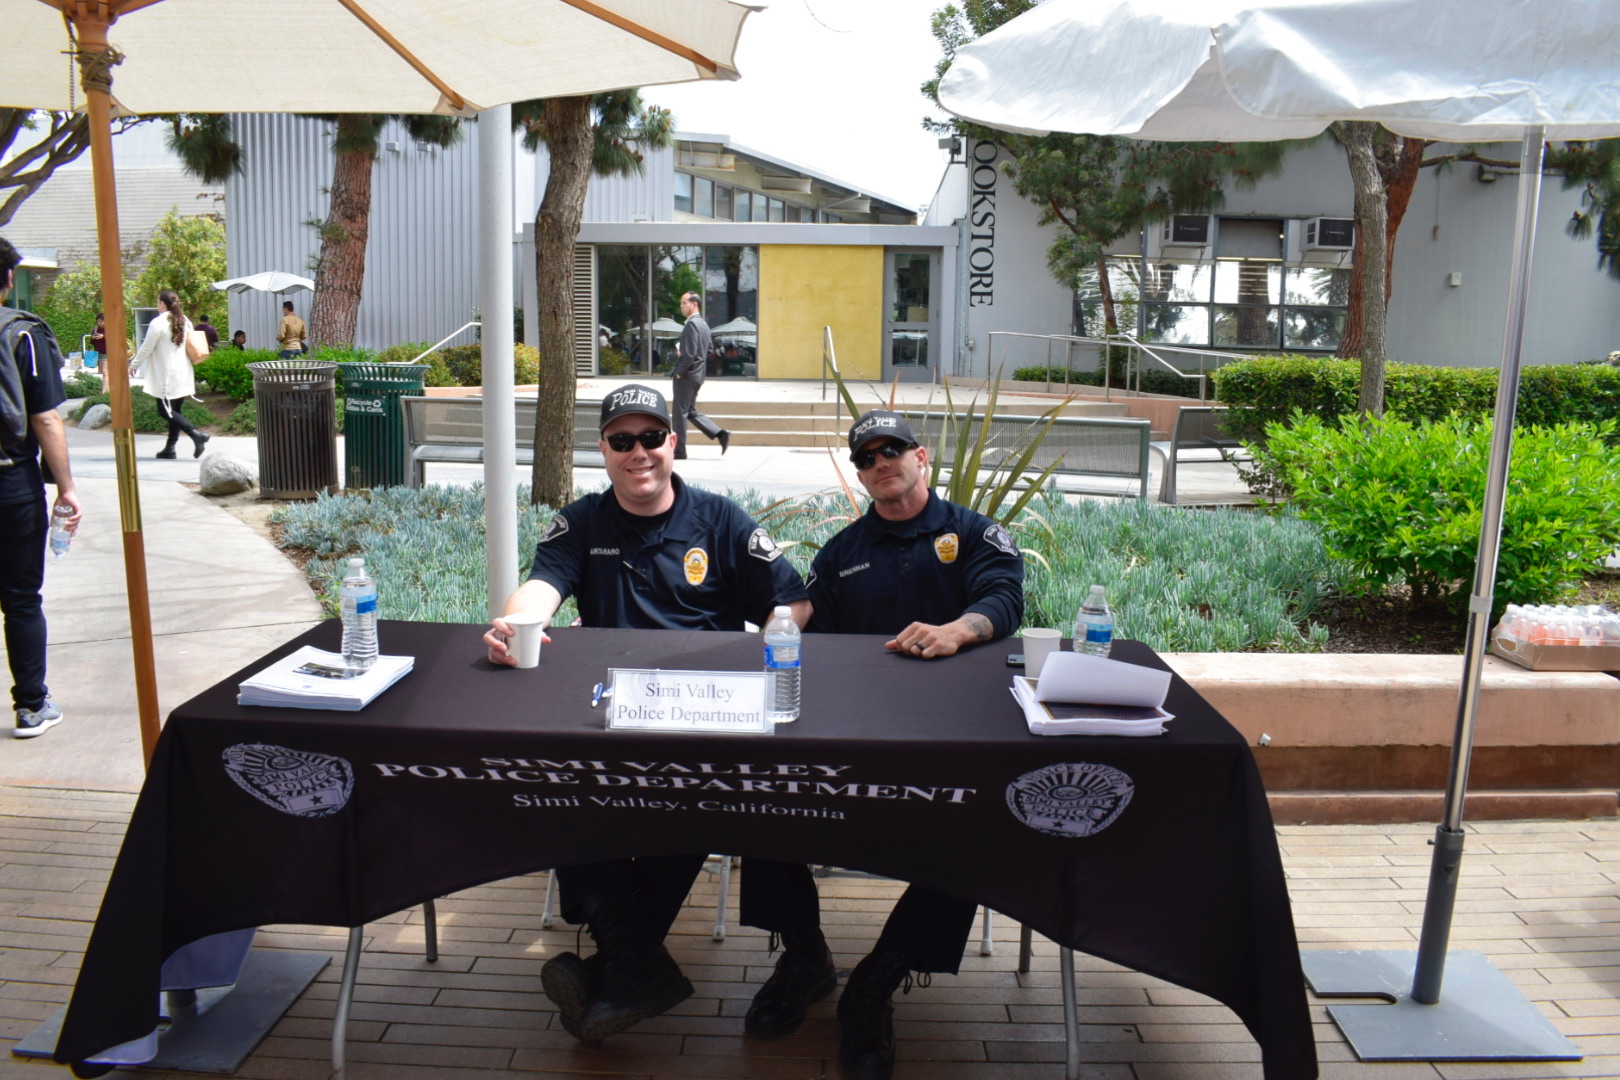  The Simi Valley Police Department looking for new talents to join their force during the Santa Monica College Job Fair on May 8, 2018 in Santa Monica, Calif. (Claudia Vardoni/ Corsair Photo) 